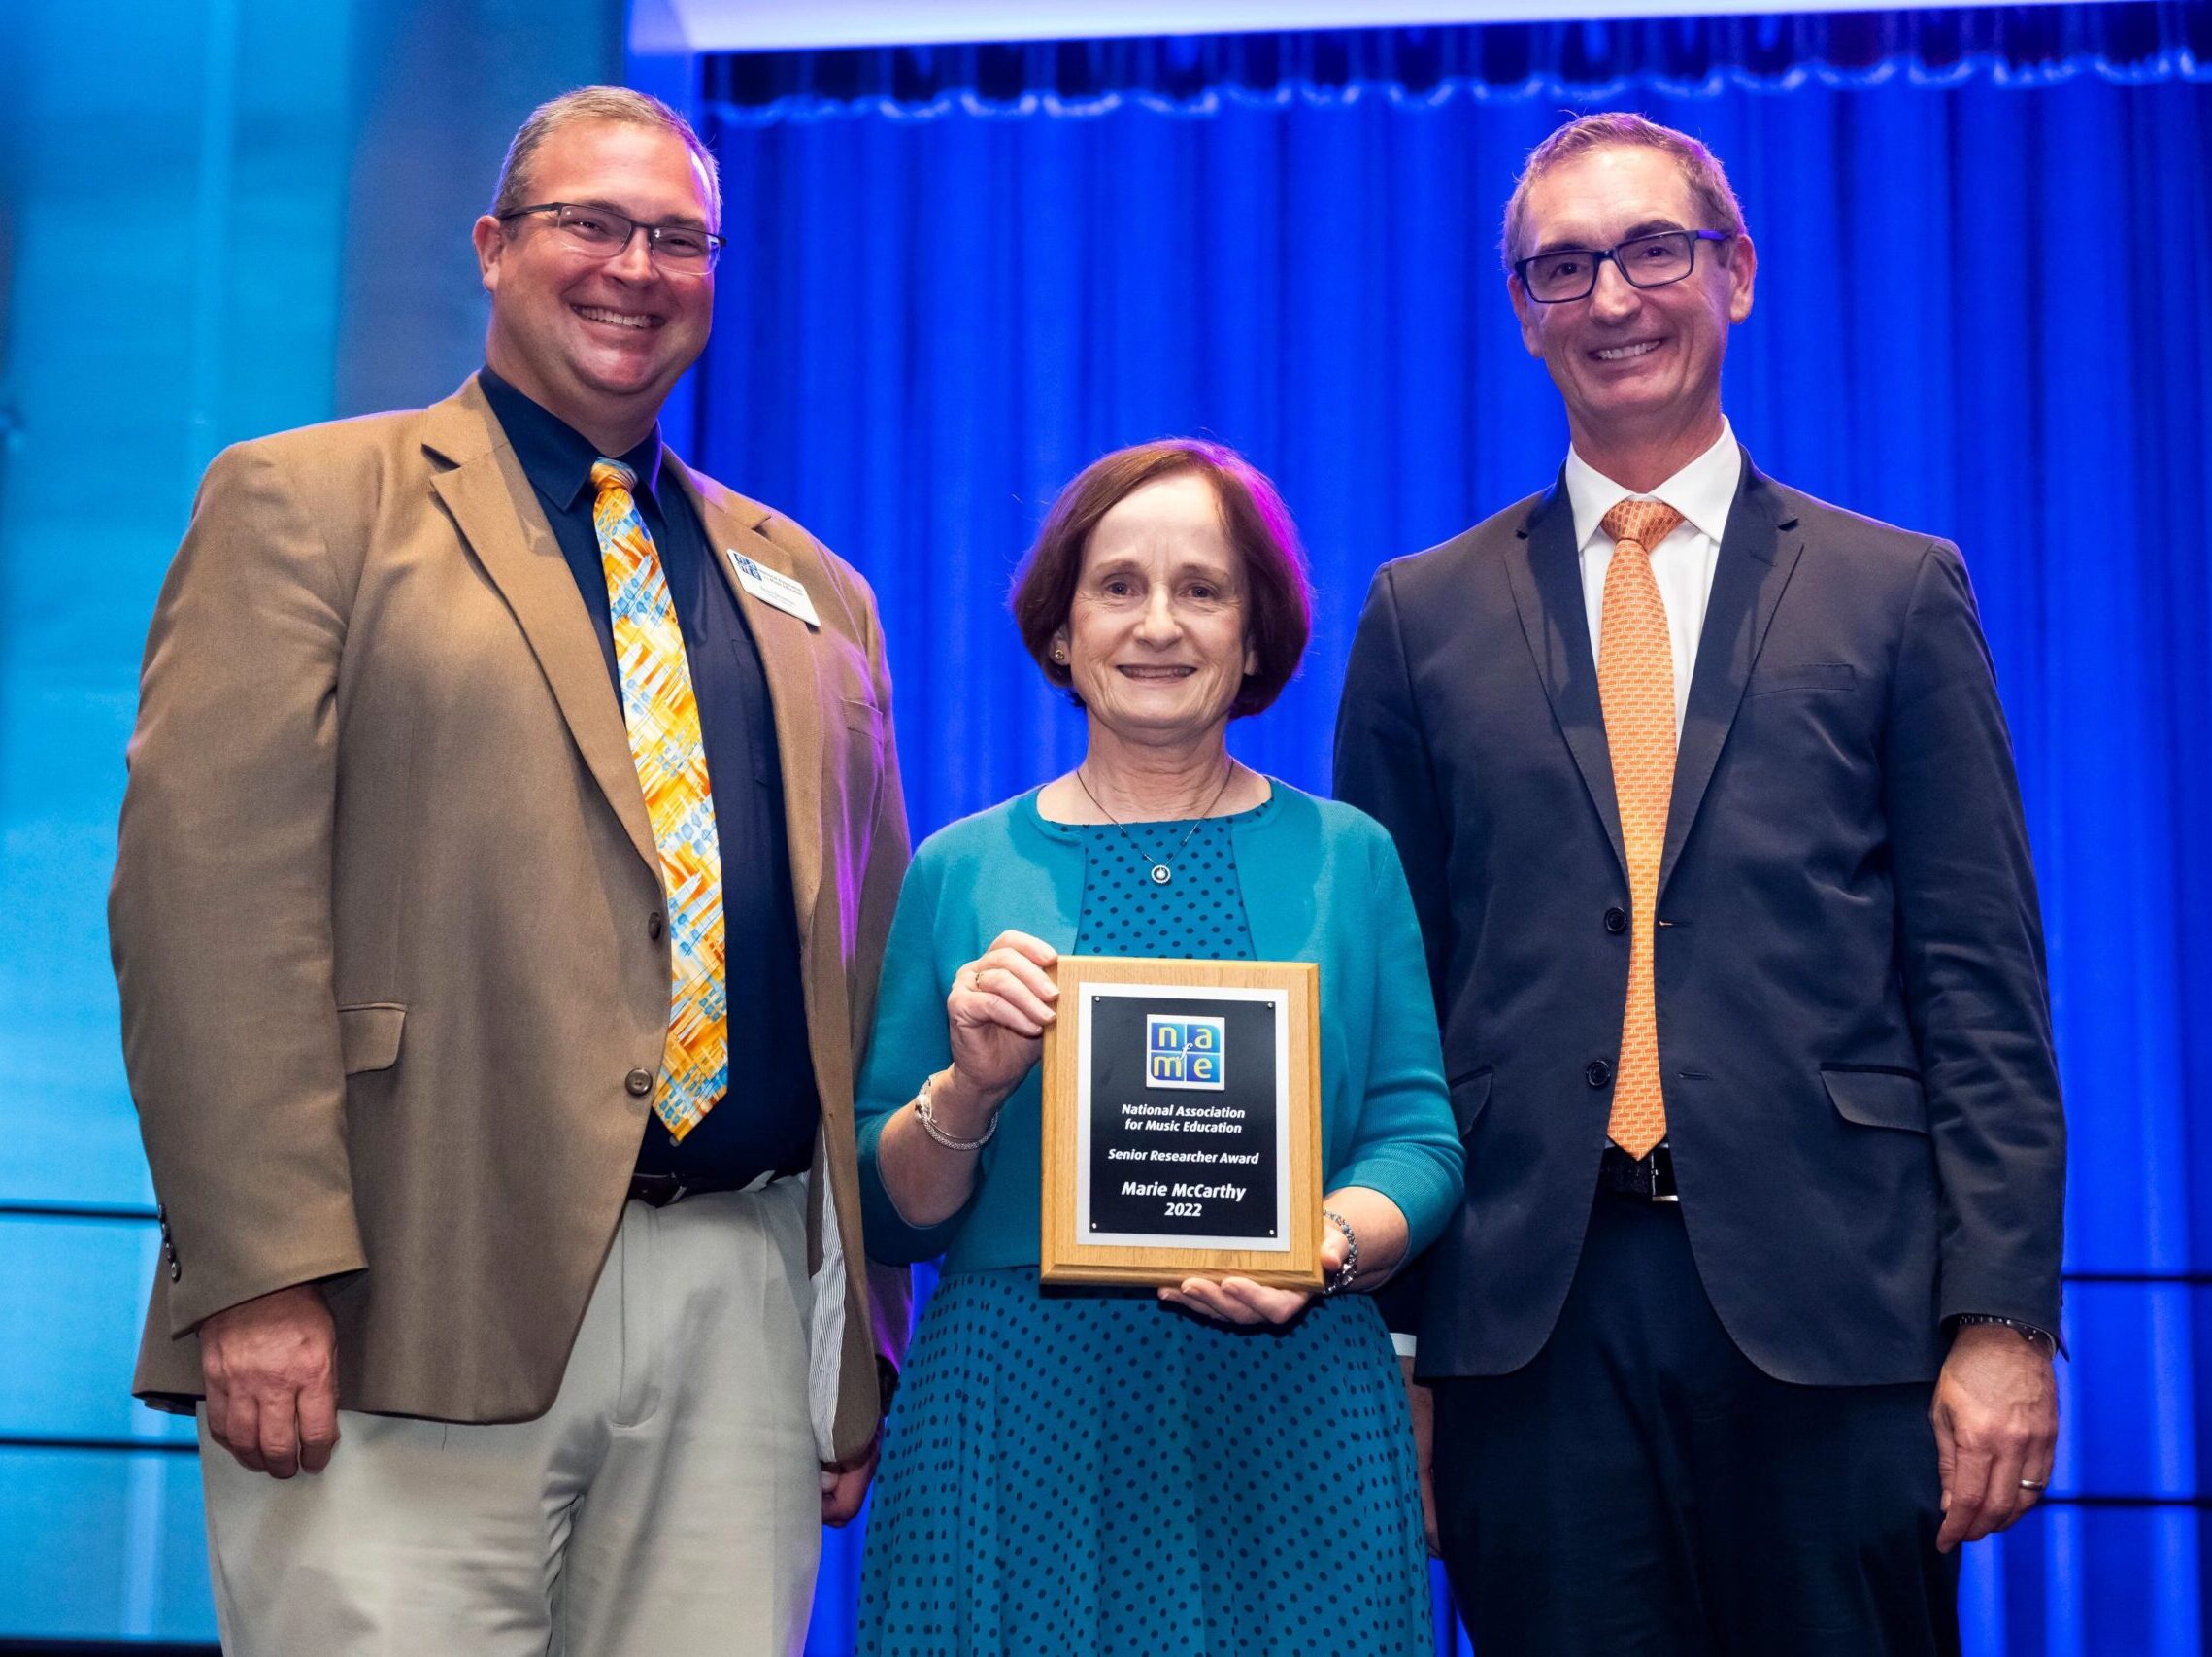 NAfME President Scott R. Sheehan (left) and Carlos R. Abril, chair of the NAfME Society for Research in Music Education, present McCarthy with the Senior Researcher Award.